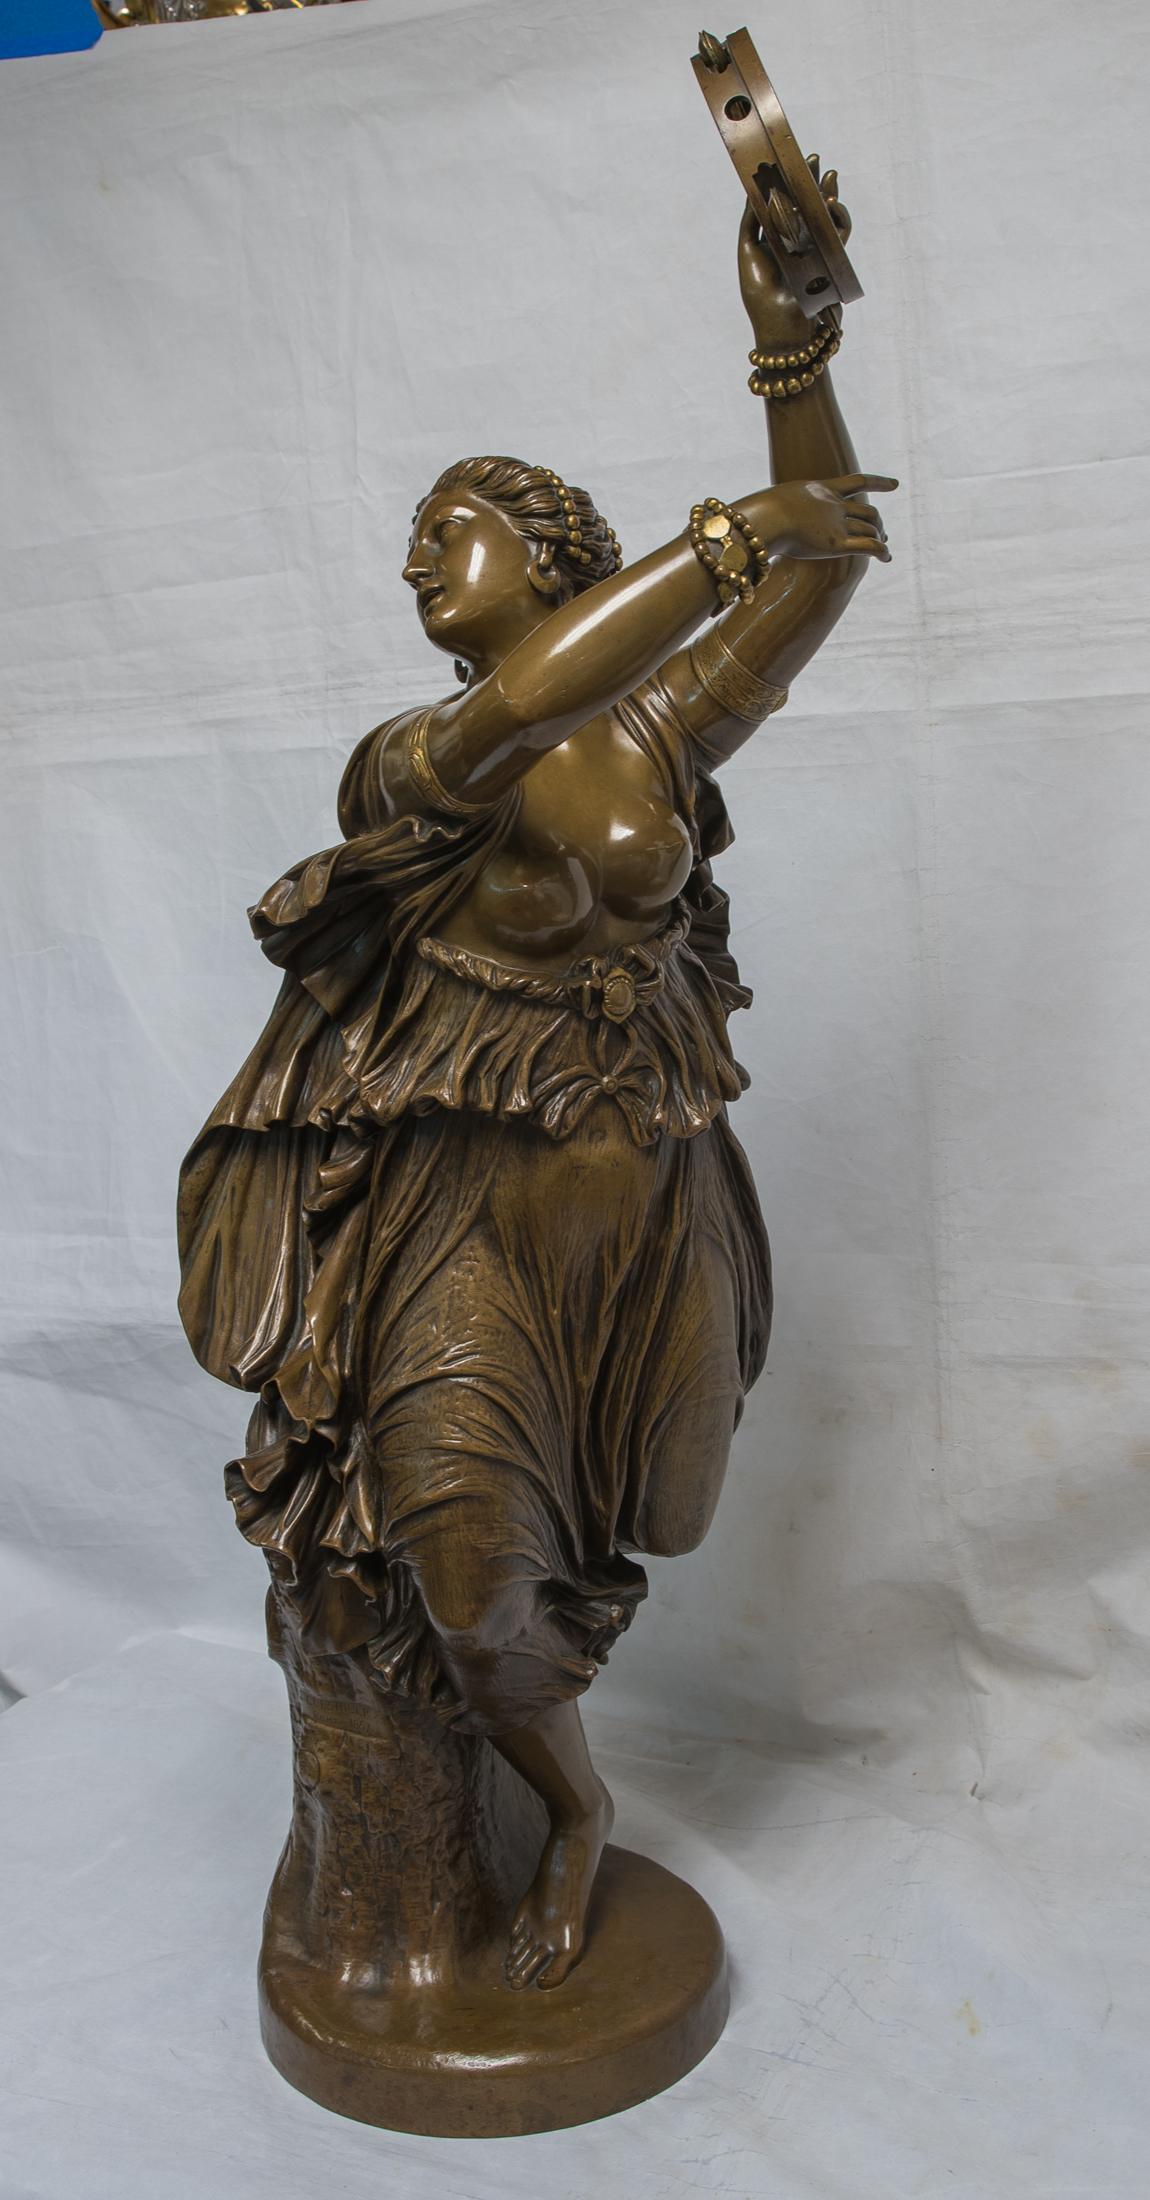 A finely casted patinated bronze sculpture of a dancer Zingara after a model by Jean-Baptiste Clésinger by F. Barbedienne foundry. Modeled dancing with a tambourine, inscribed F. BARBEDIENNE.FONDEUR with the reduction mecanique A. Collas Brevete